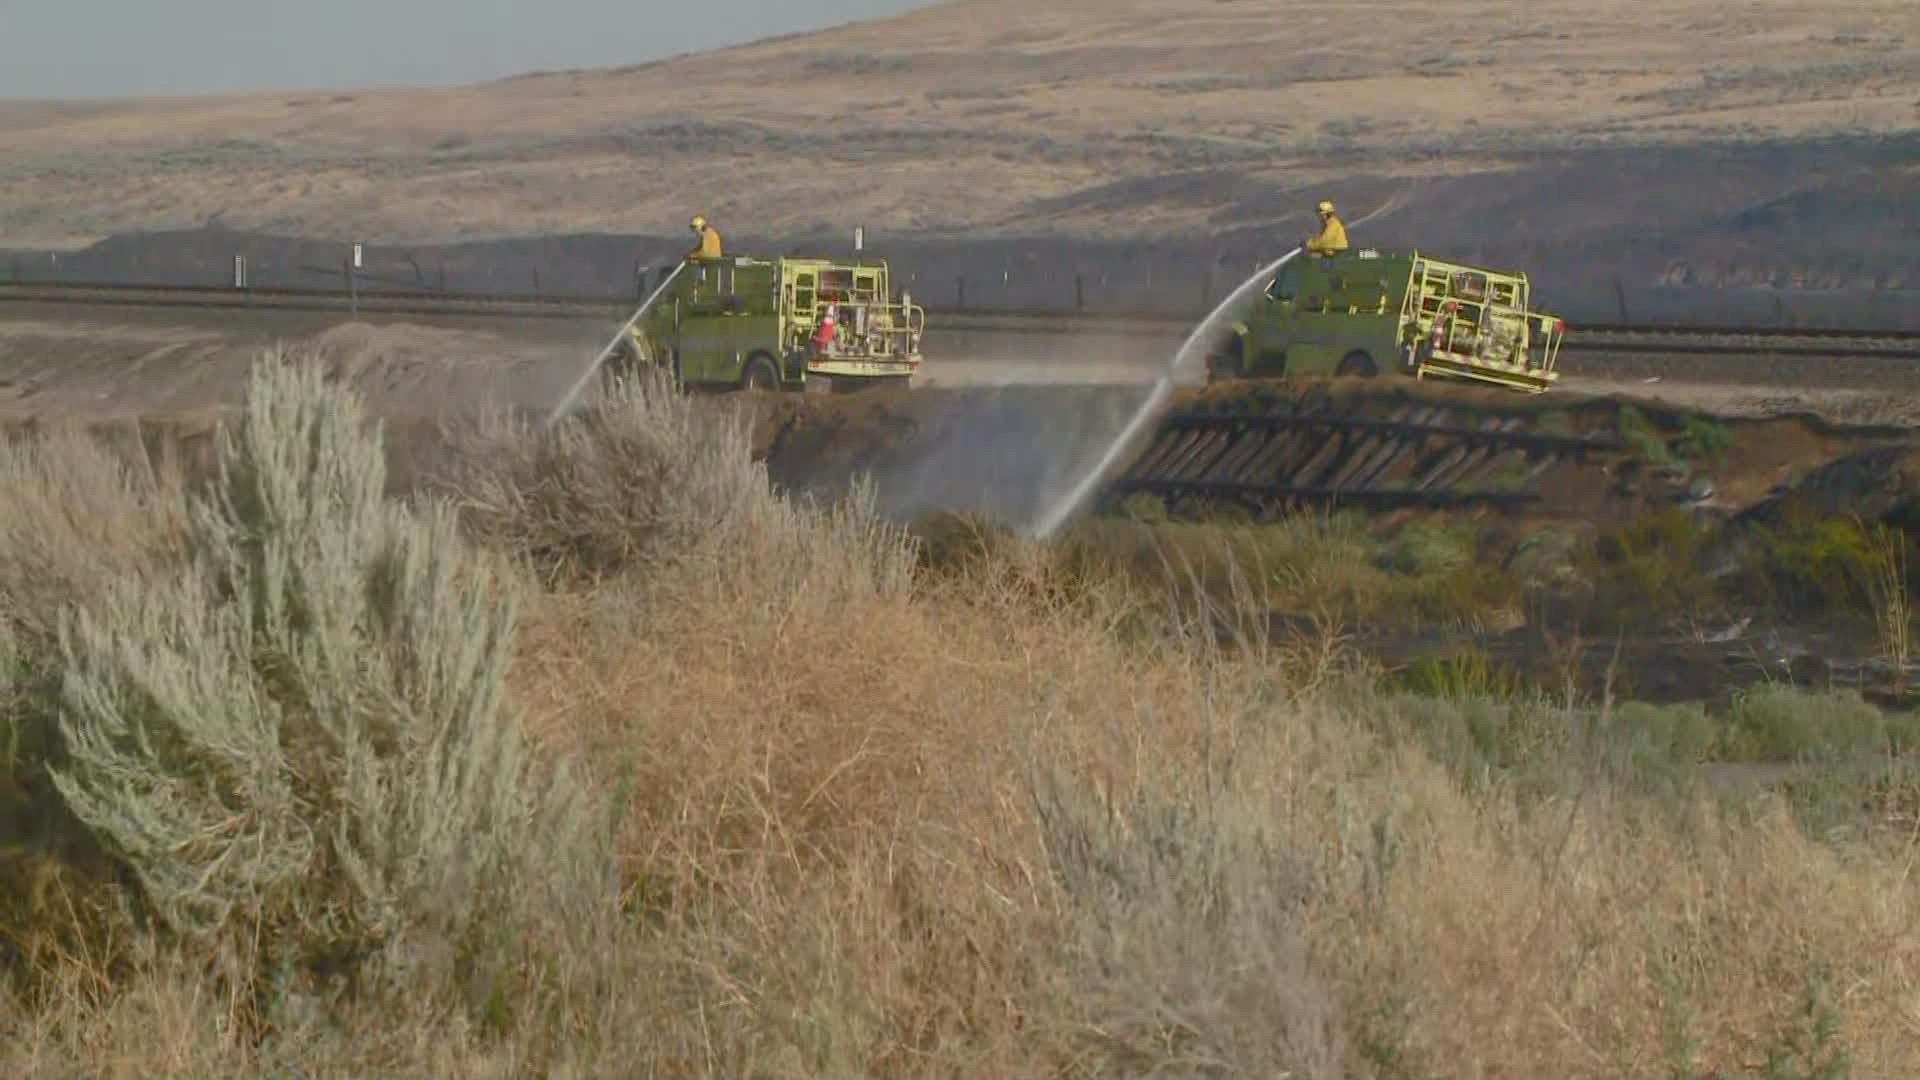 The fire started at approximately 11:45 a.m. on Thursday and burned 2,000 acres, according to the Washington State Fire Marshal.